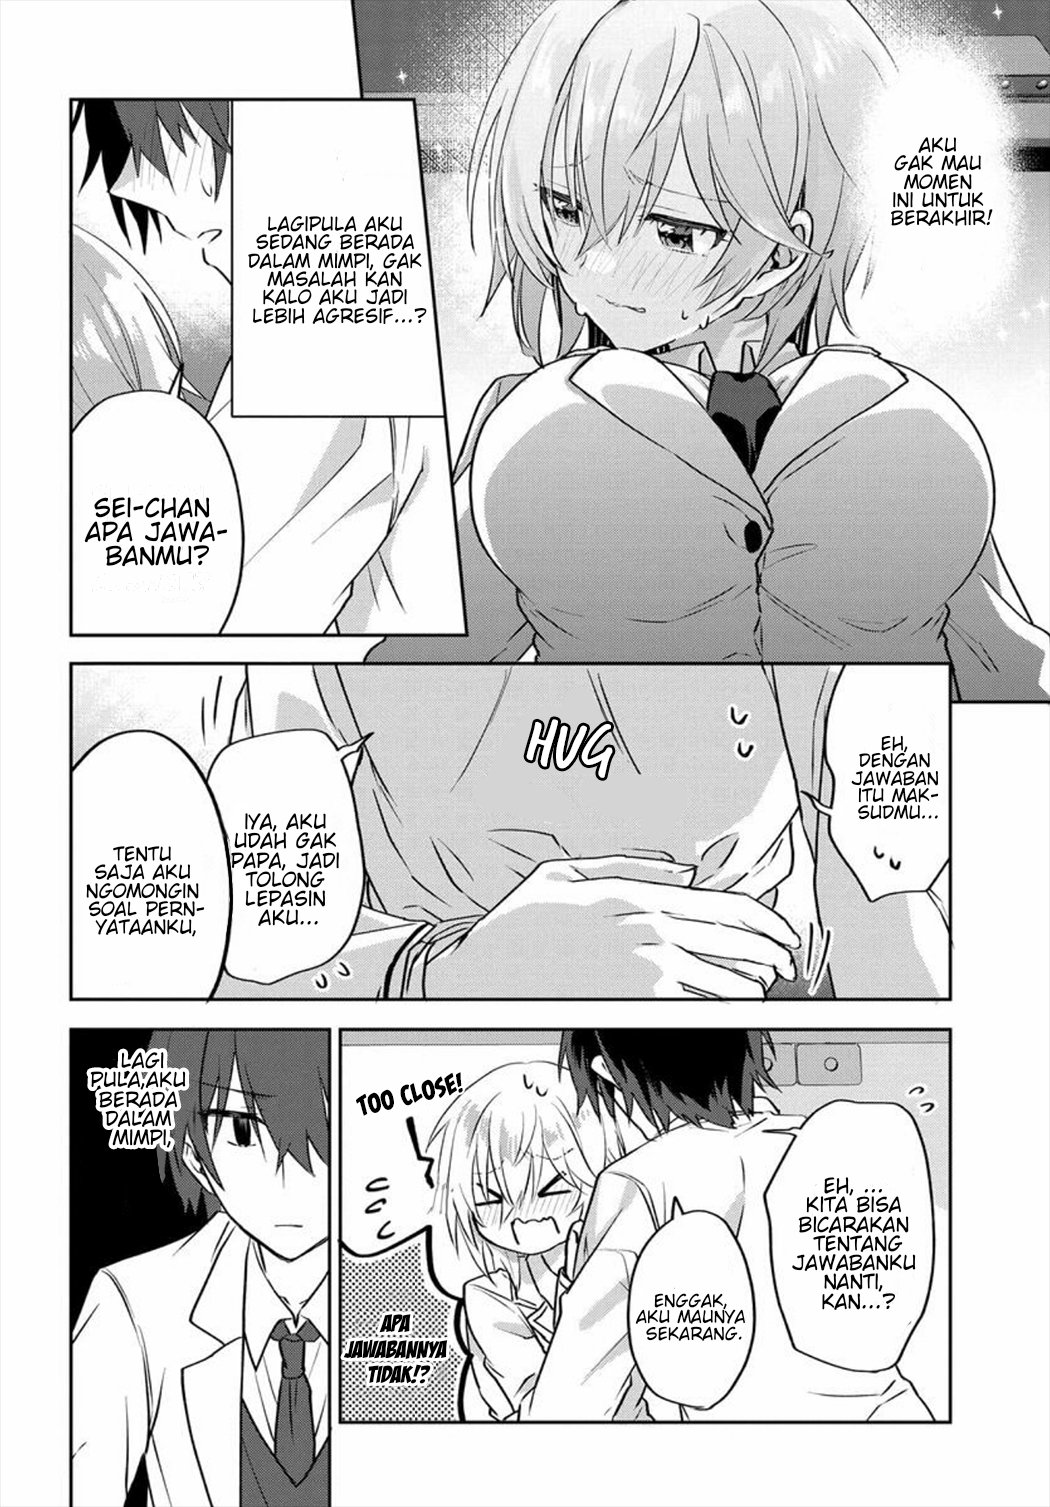 Since I'Ve Entered The World Of Romantic Comedy Manga, I'Ll Do My Best To Make The Losing Heroine Happy. Chapter 1 - 253